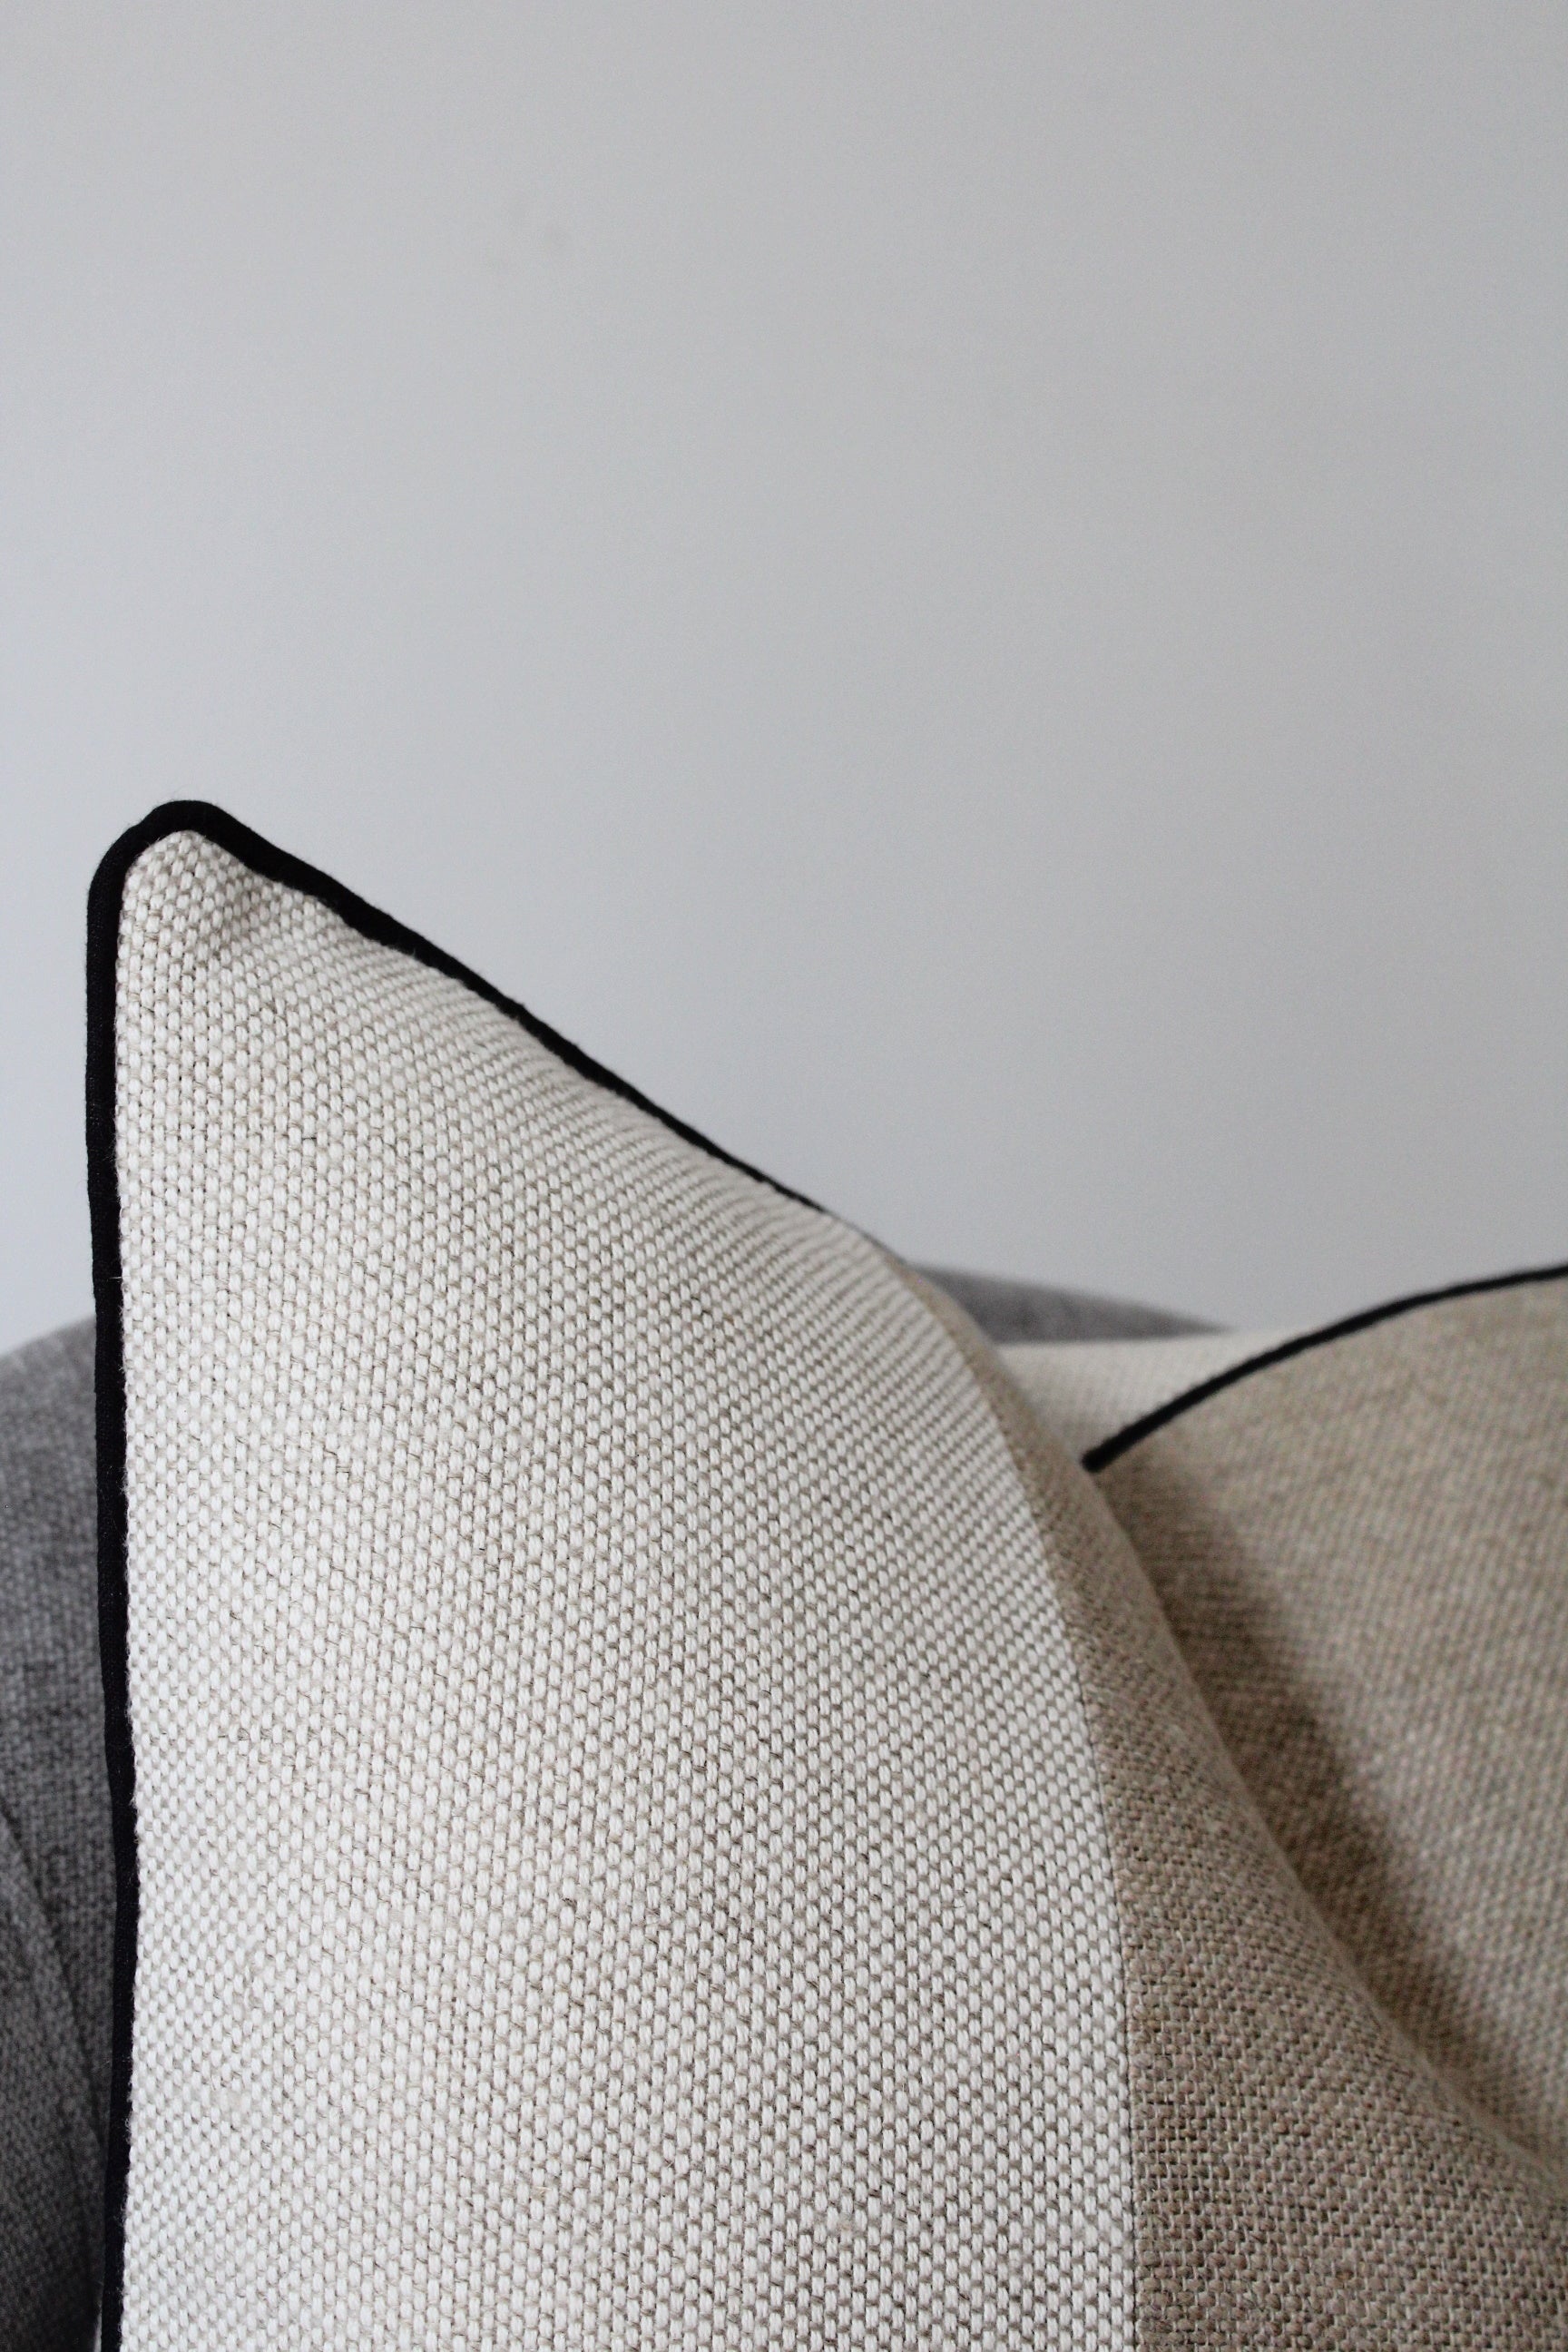 Display statement linen cushion cover in neutral beige tones with black piping edge